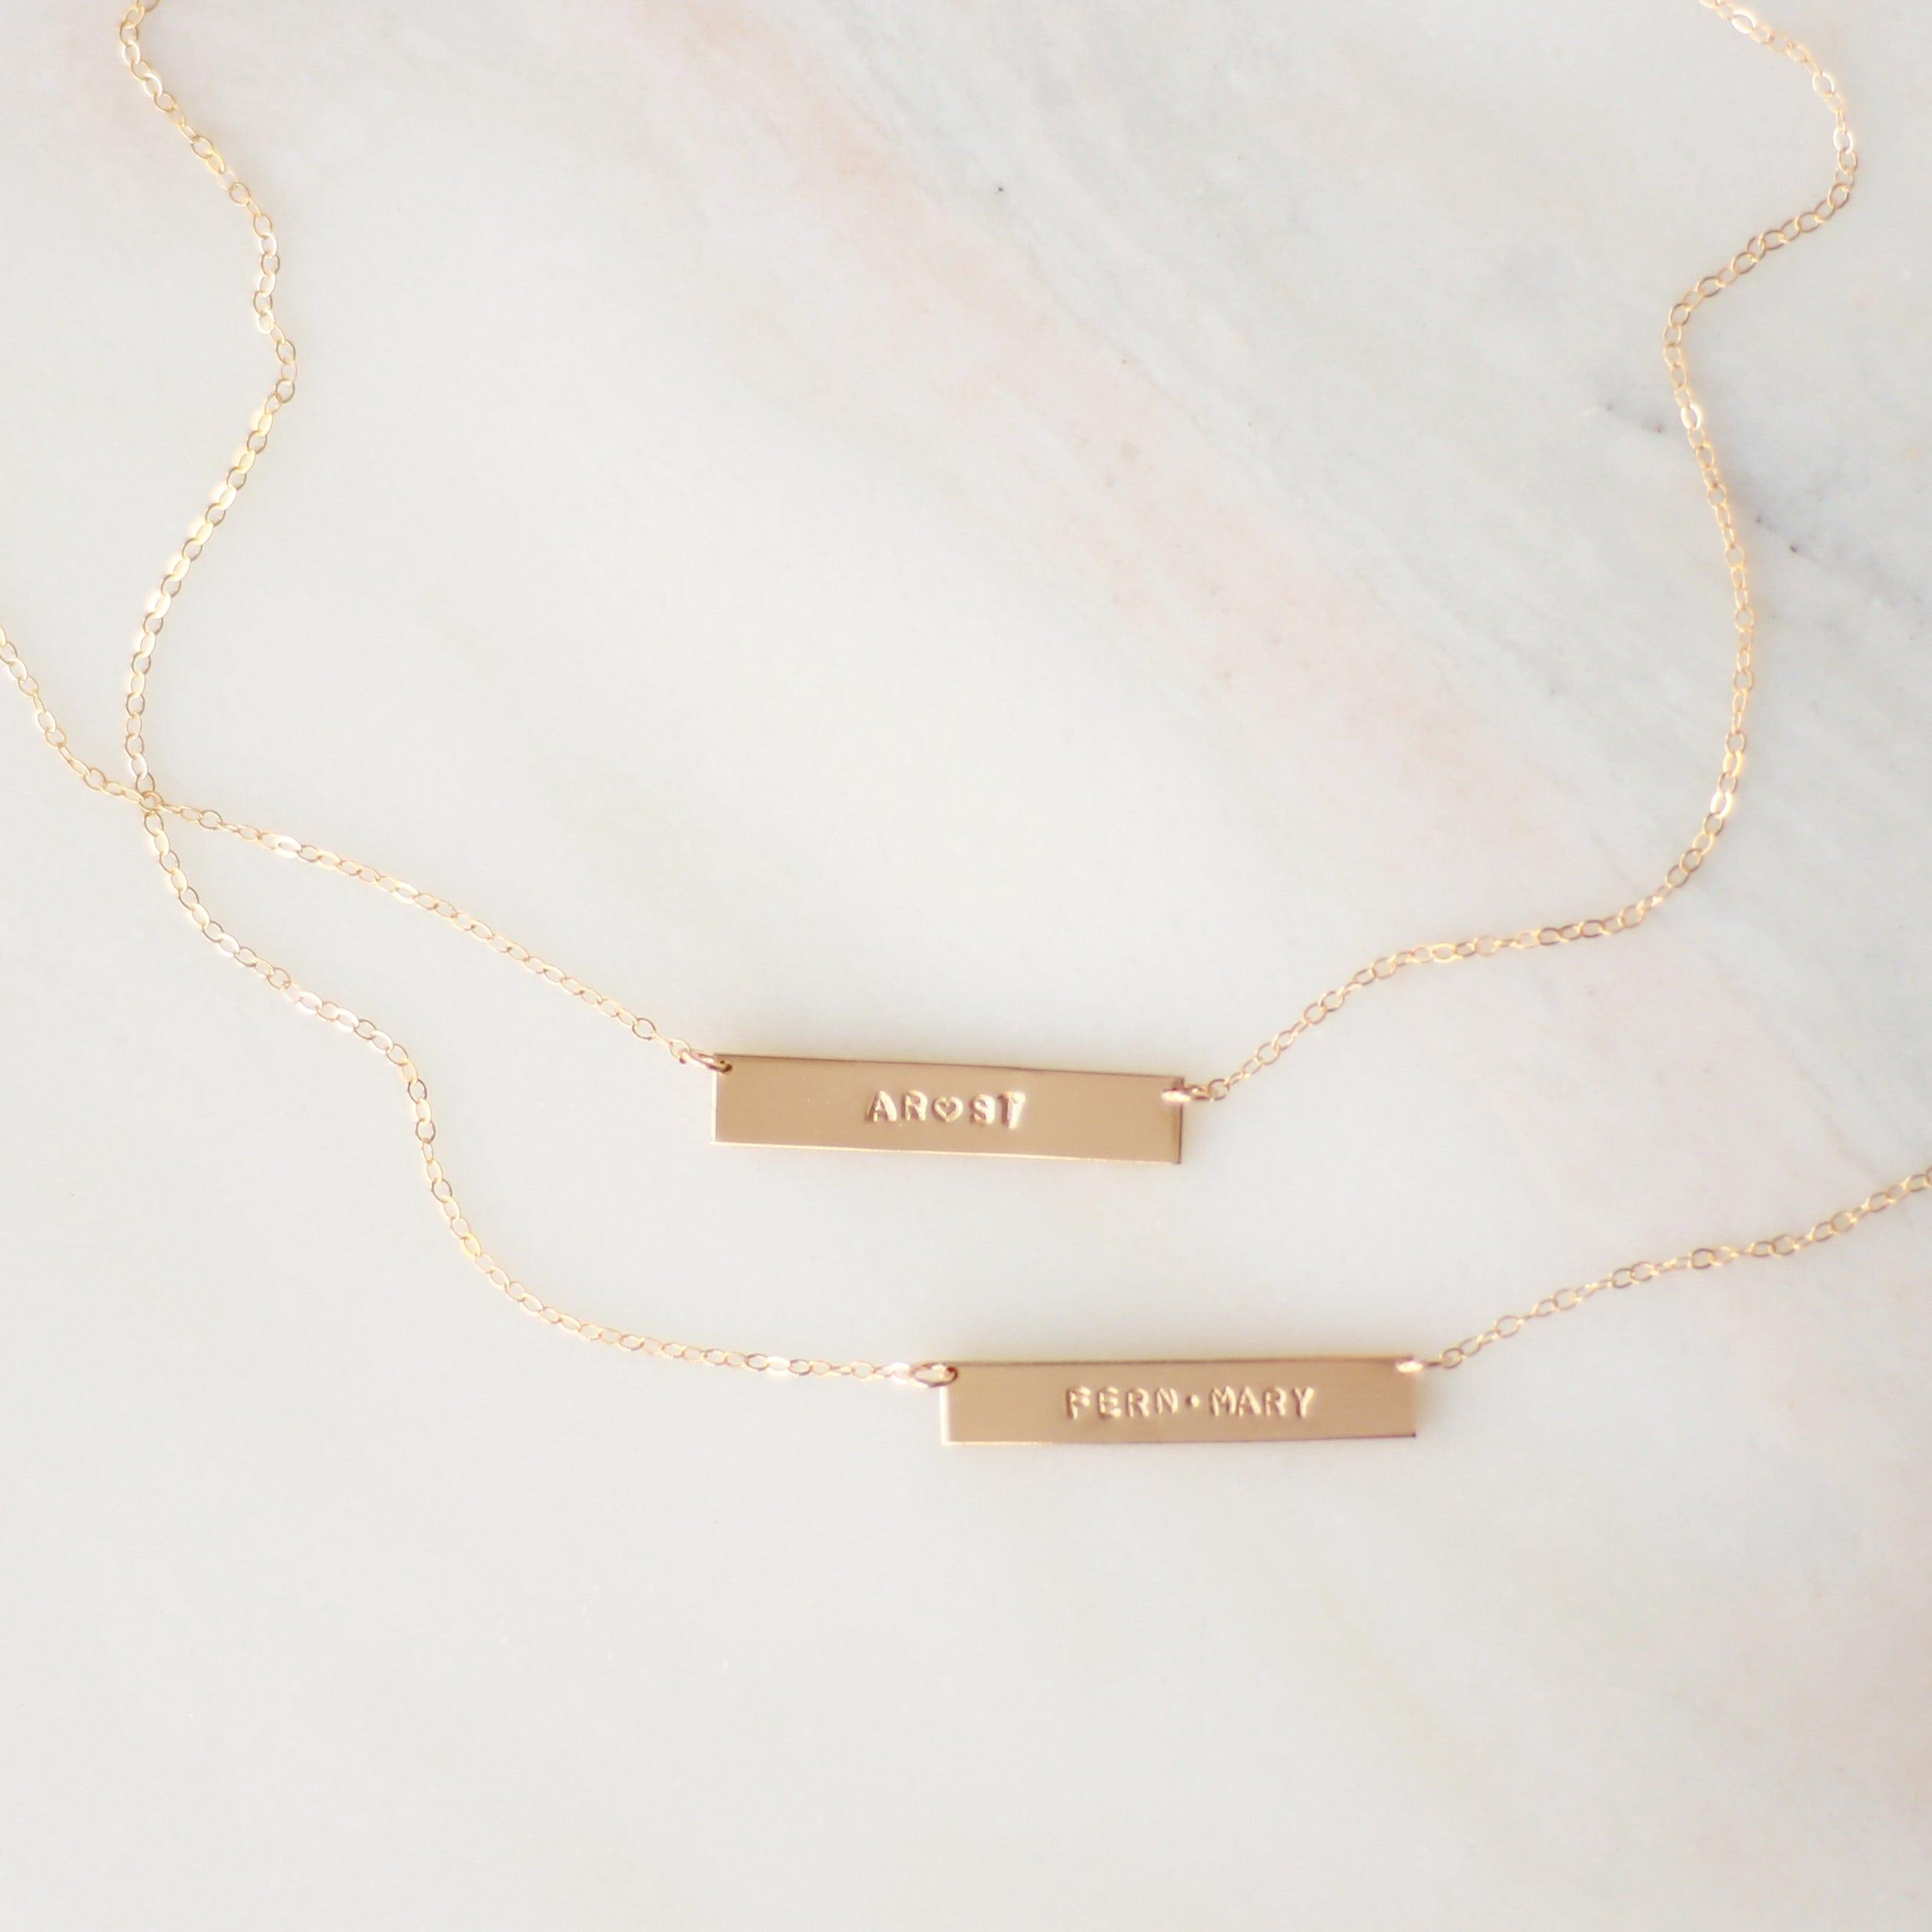 Personalized Bar Necklace - Nolia Jewelry - Meaningful + Sustainably Handcrafted Jewelry